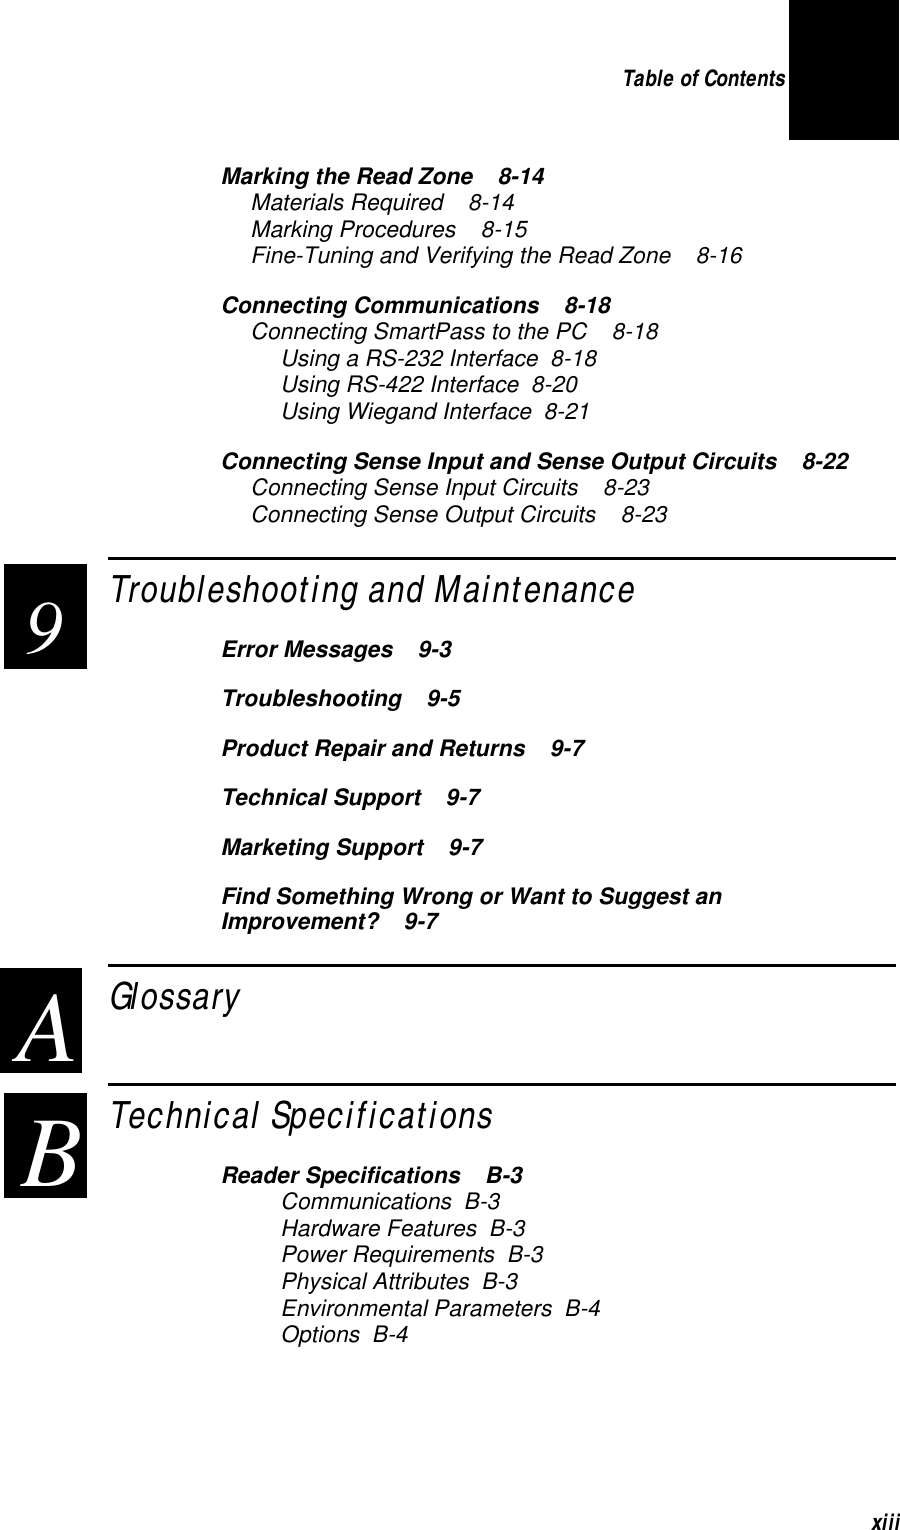 Table of Contents xiiiMarking the Read Zone   8-14Materials Required   8-14Marking Procedures   8-15Fine-Tuning and Verifying the Read Zone   8-16Connecting Communications   8-18Connecting SmartPass to the PC   8-18Using a RS-232 Interface  8-18Using RS-422 Interface  8-20Using Wiegand Interface  8-21Connecting Sense Input and Sense Output Circuits   8-22Connecting Sense Input Circuits   8-23Connecting Sense Output Circuits   8-23Troubleshooting and Maintenance  Error Messages   9-3Troubleshooting   9-5Product Repair and Returns   9-7Technical Support   9-7Marketing Support   9-7Find Something Wrong or Want to Suggest an Improvement?   9-7Glossary  Technical Specifications  Reader Specifications   B-3Communications  B-3Hardware Features  B-3Power Requirements  B-3Physical Attributes  B-3Environmental Parameters  B-4Options  B-49 A B